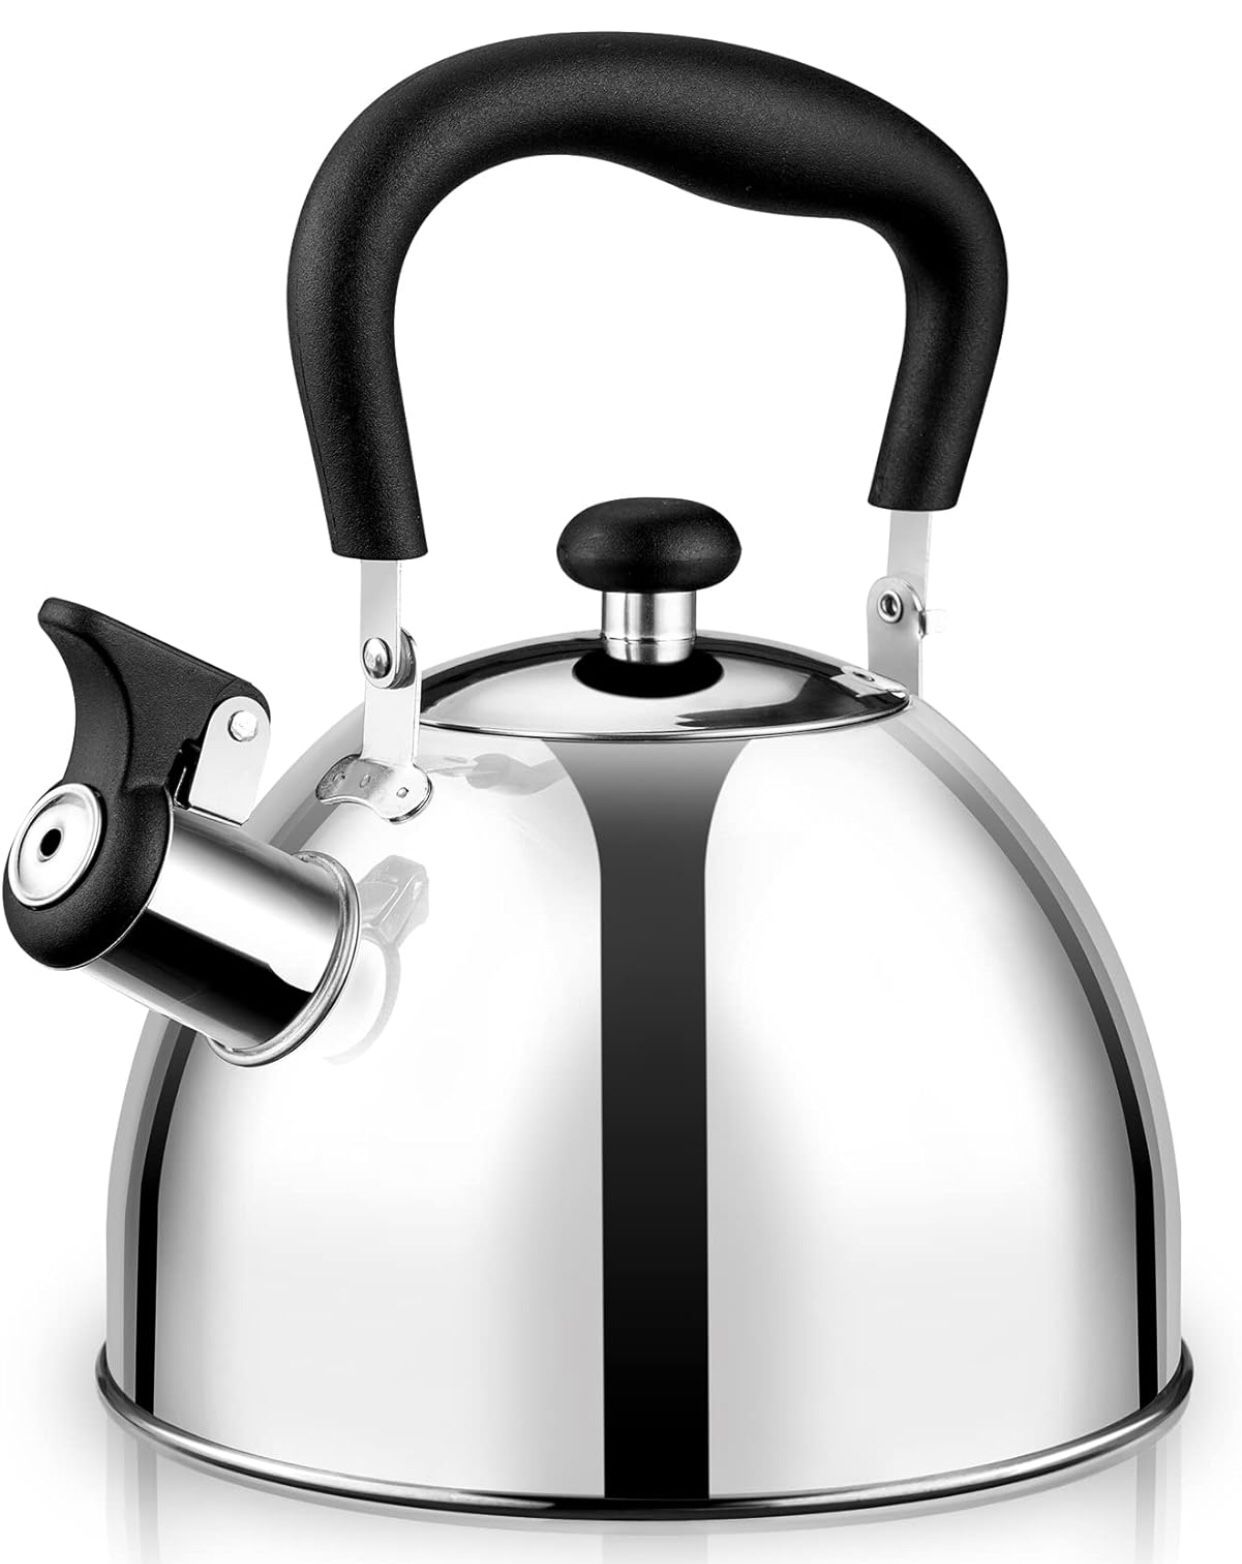 2.2QT Whistling Teapot for Stovetop with Universal Base - Food Grade Stainless Steel Tea Pot